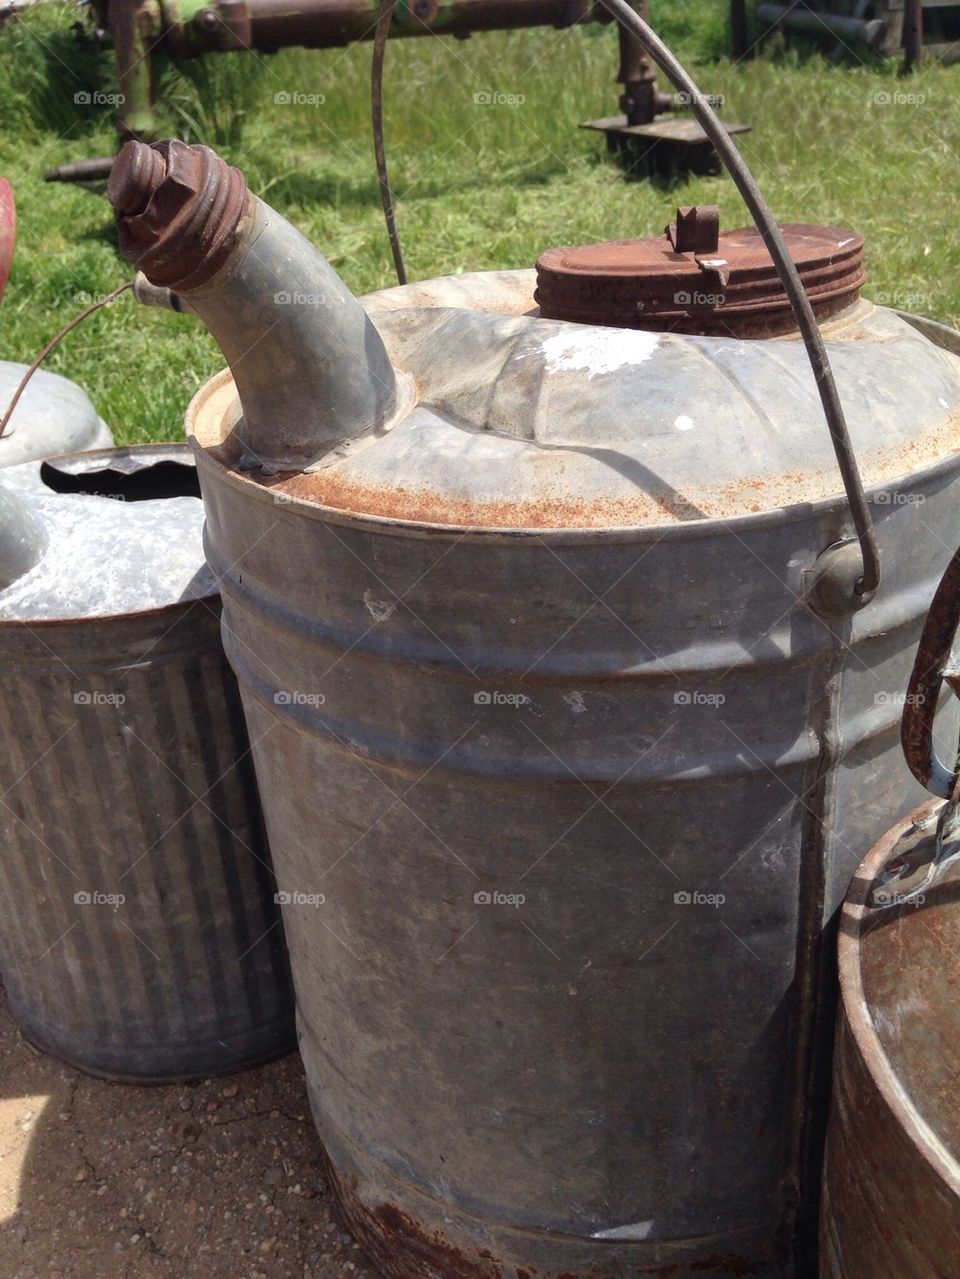 Old gas cans